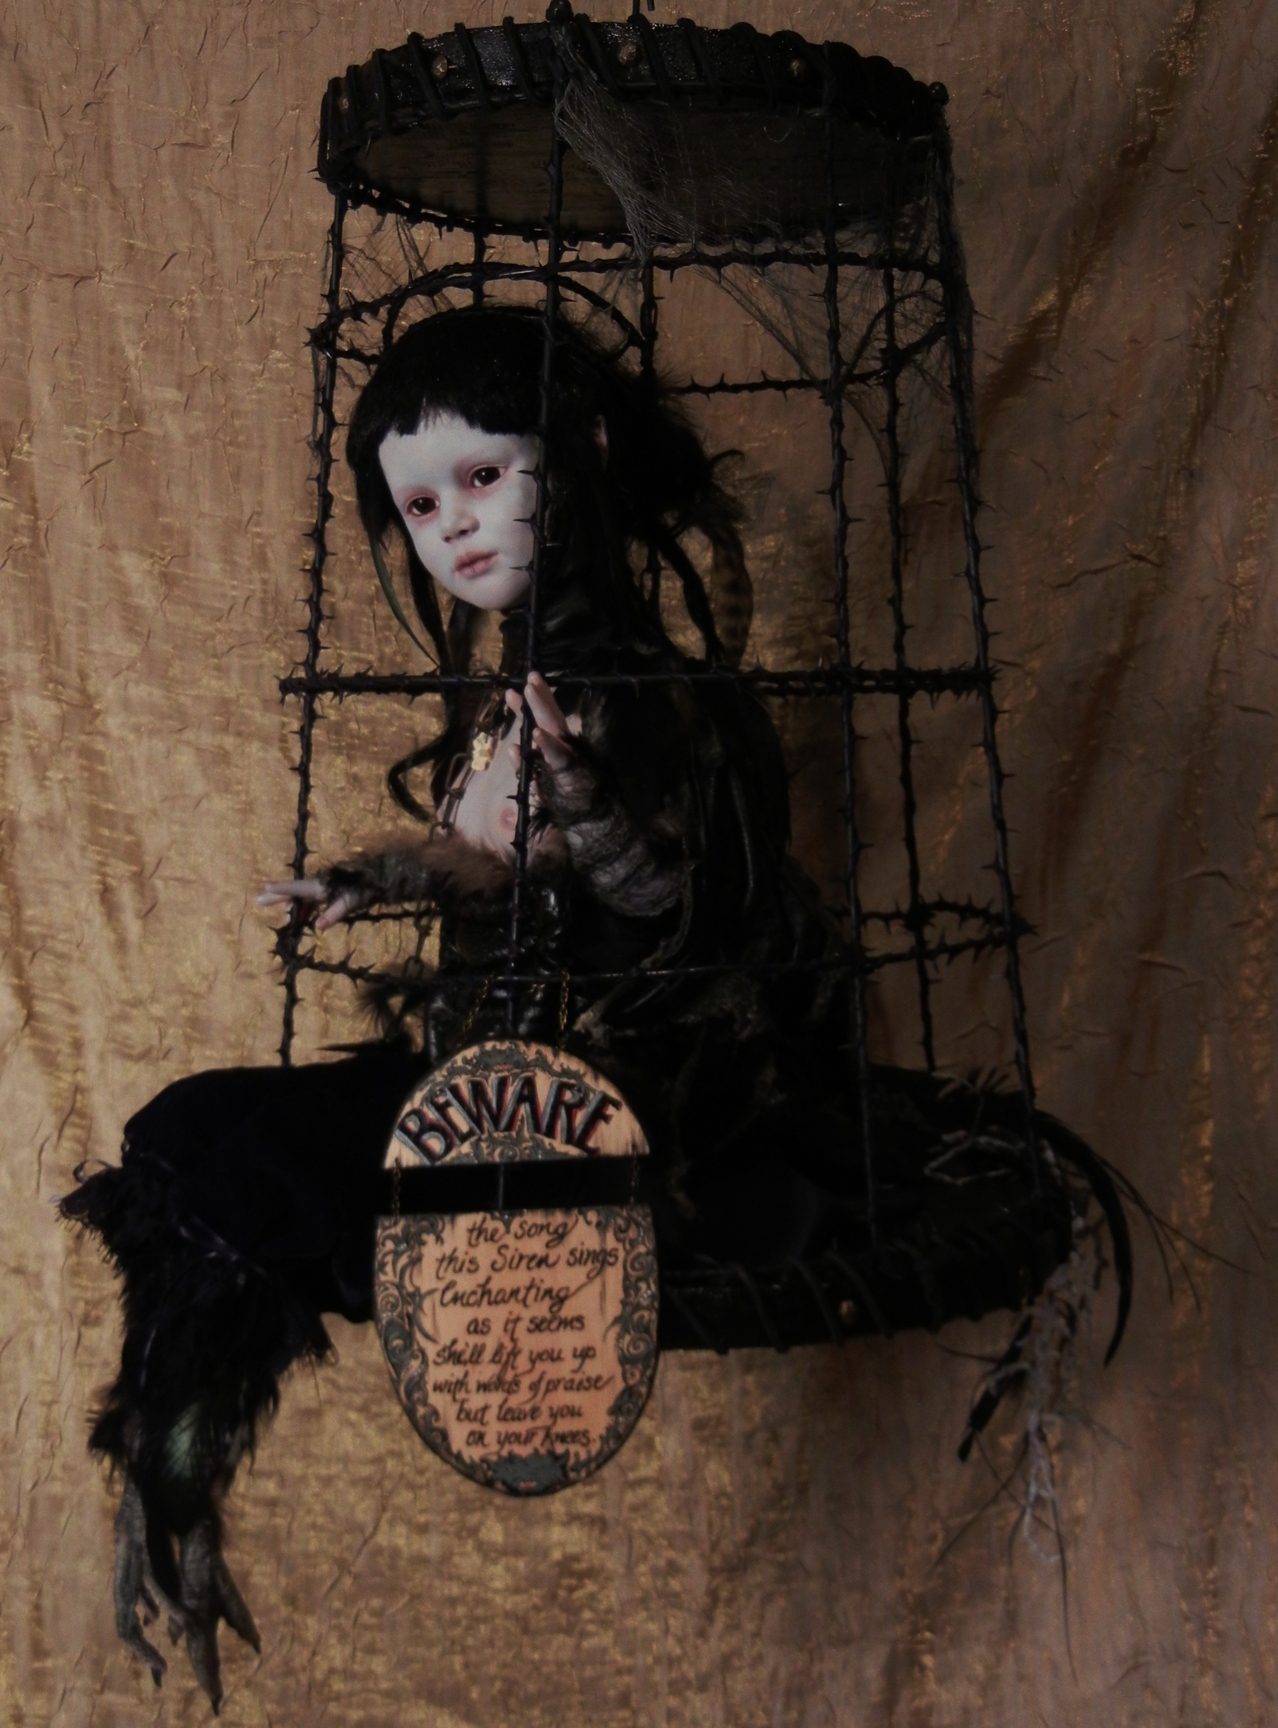 taxidermy artdoll mixed media assemblage of a pale goth doll with black feathered bird feet sitting in a suspended black cage